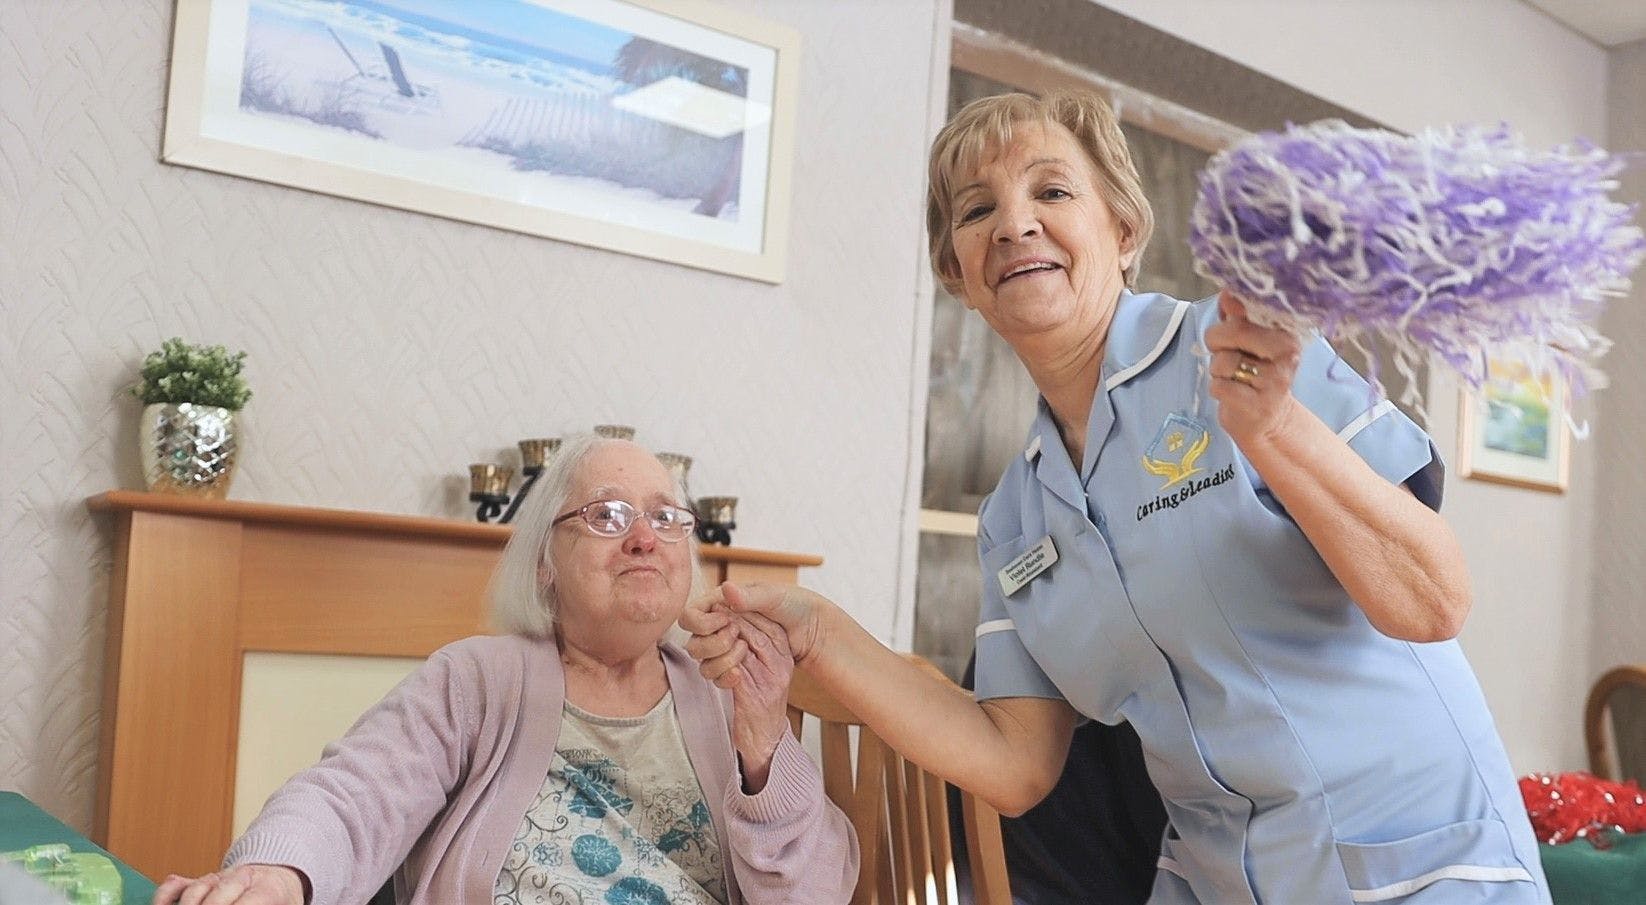 Caring & Leading - Marine Park View care home 004